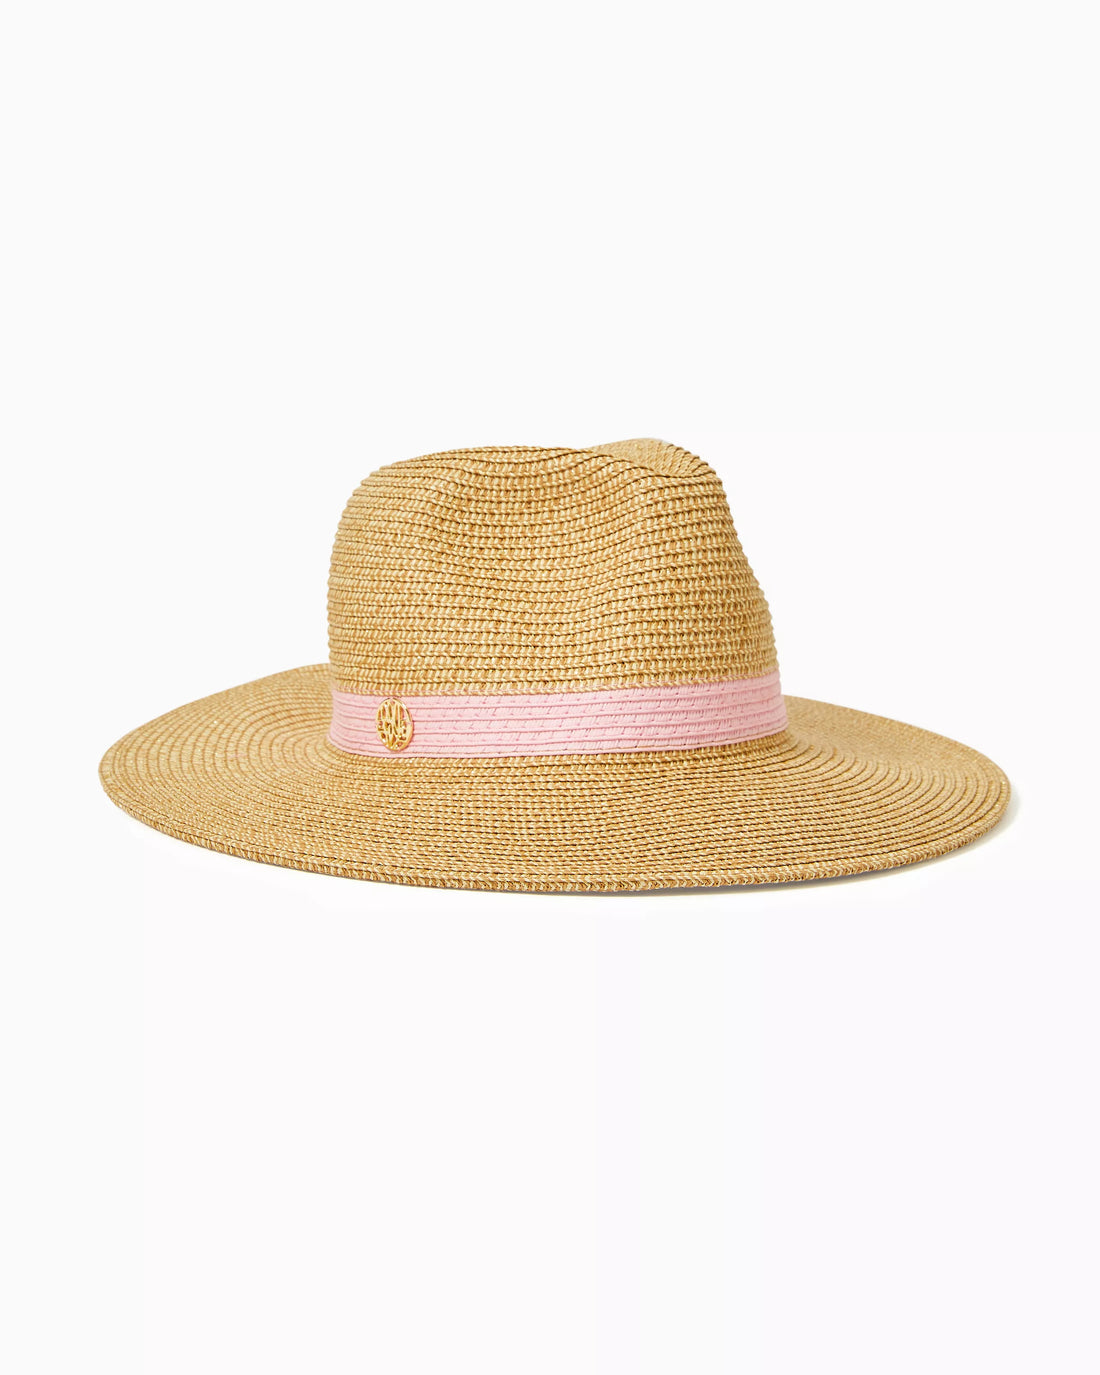 Lilly Pulitzer | Shade Seeker Hat